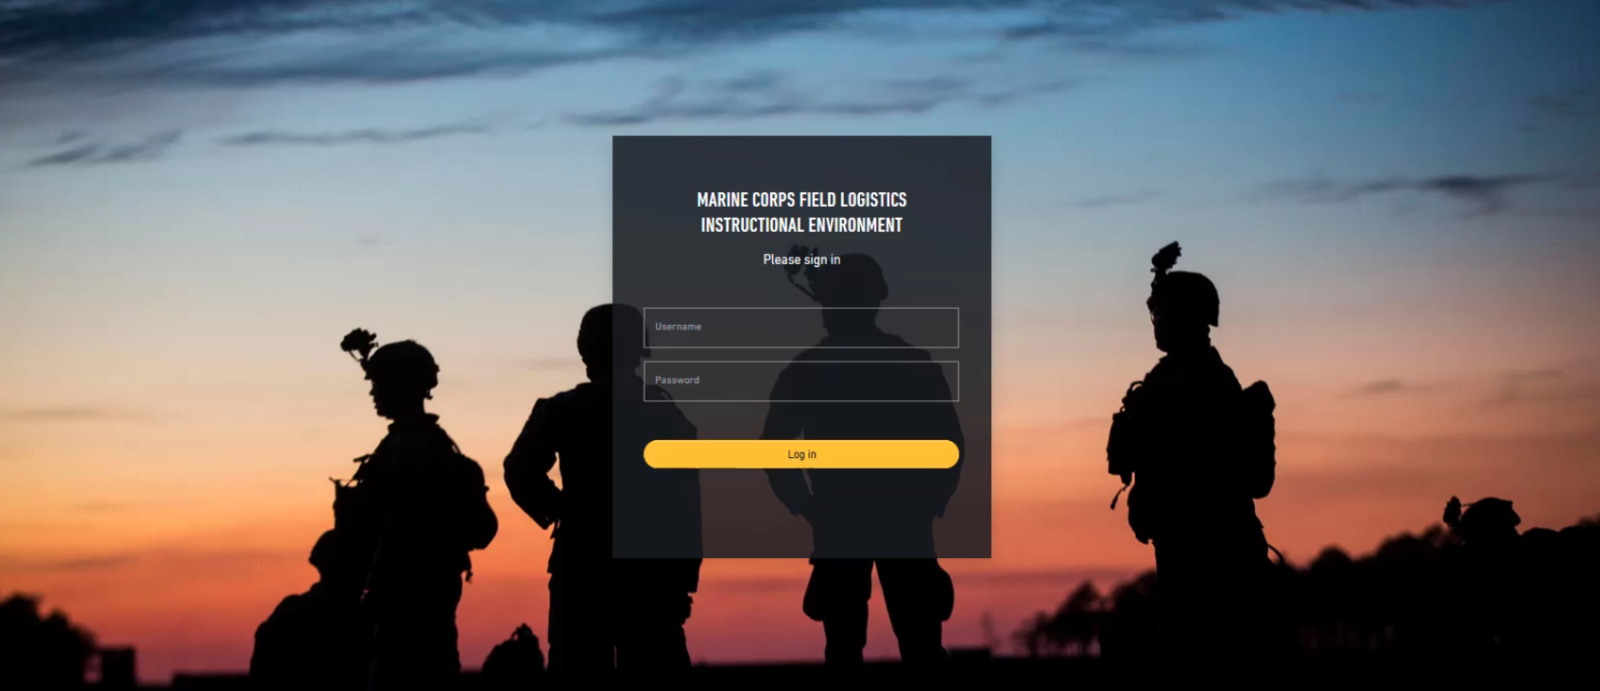 This image shows the login screen for the MCFLIE serious game. Three soldiers are silouetted against a sunset in the background. The foreground has the login page.